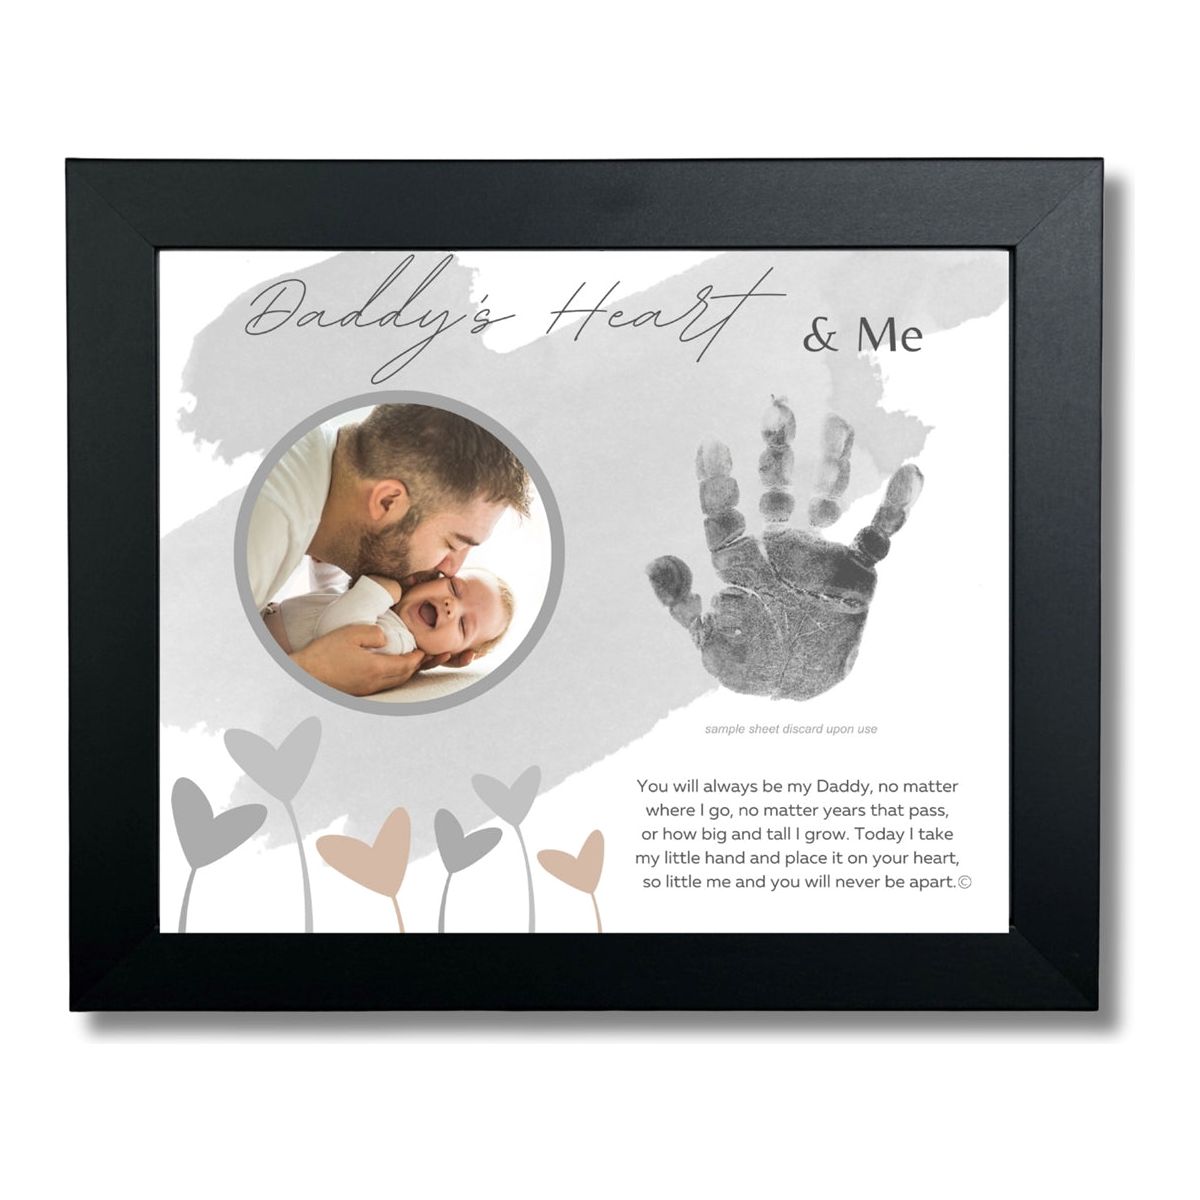 8x10 black frame with "Daddy's Heart & Me" artwork with poem, space for a handprint, and a circular opening for a photograph.